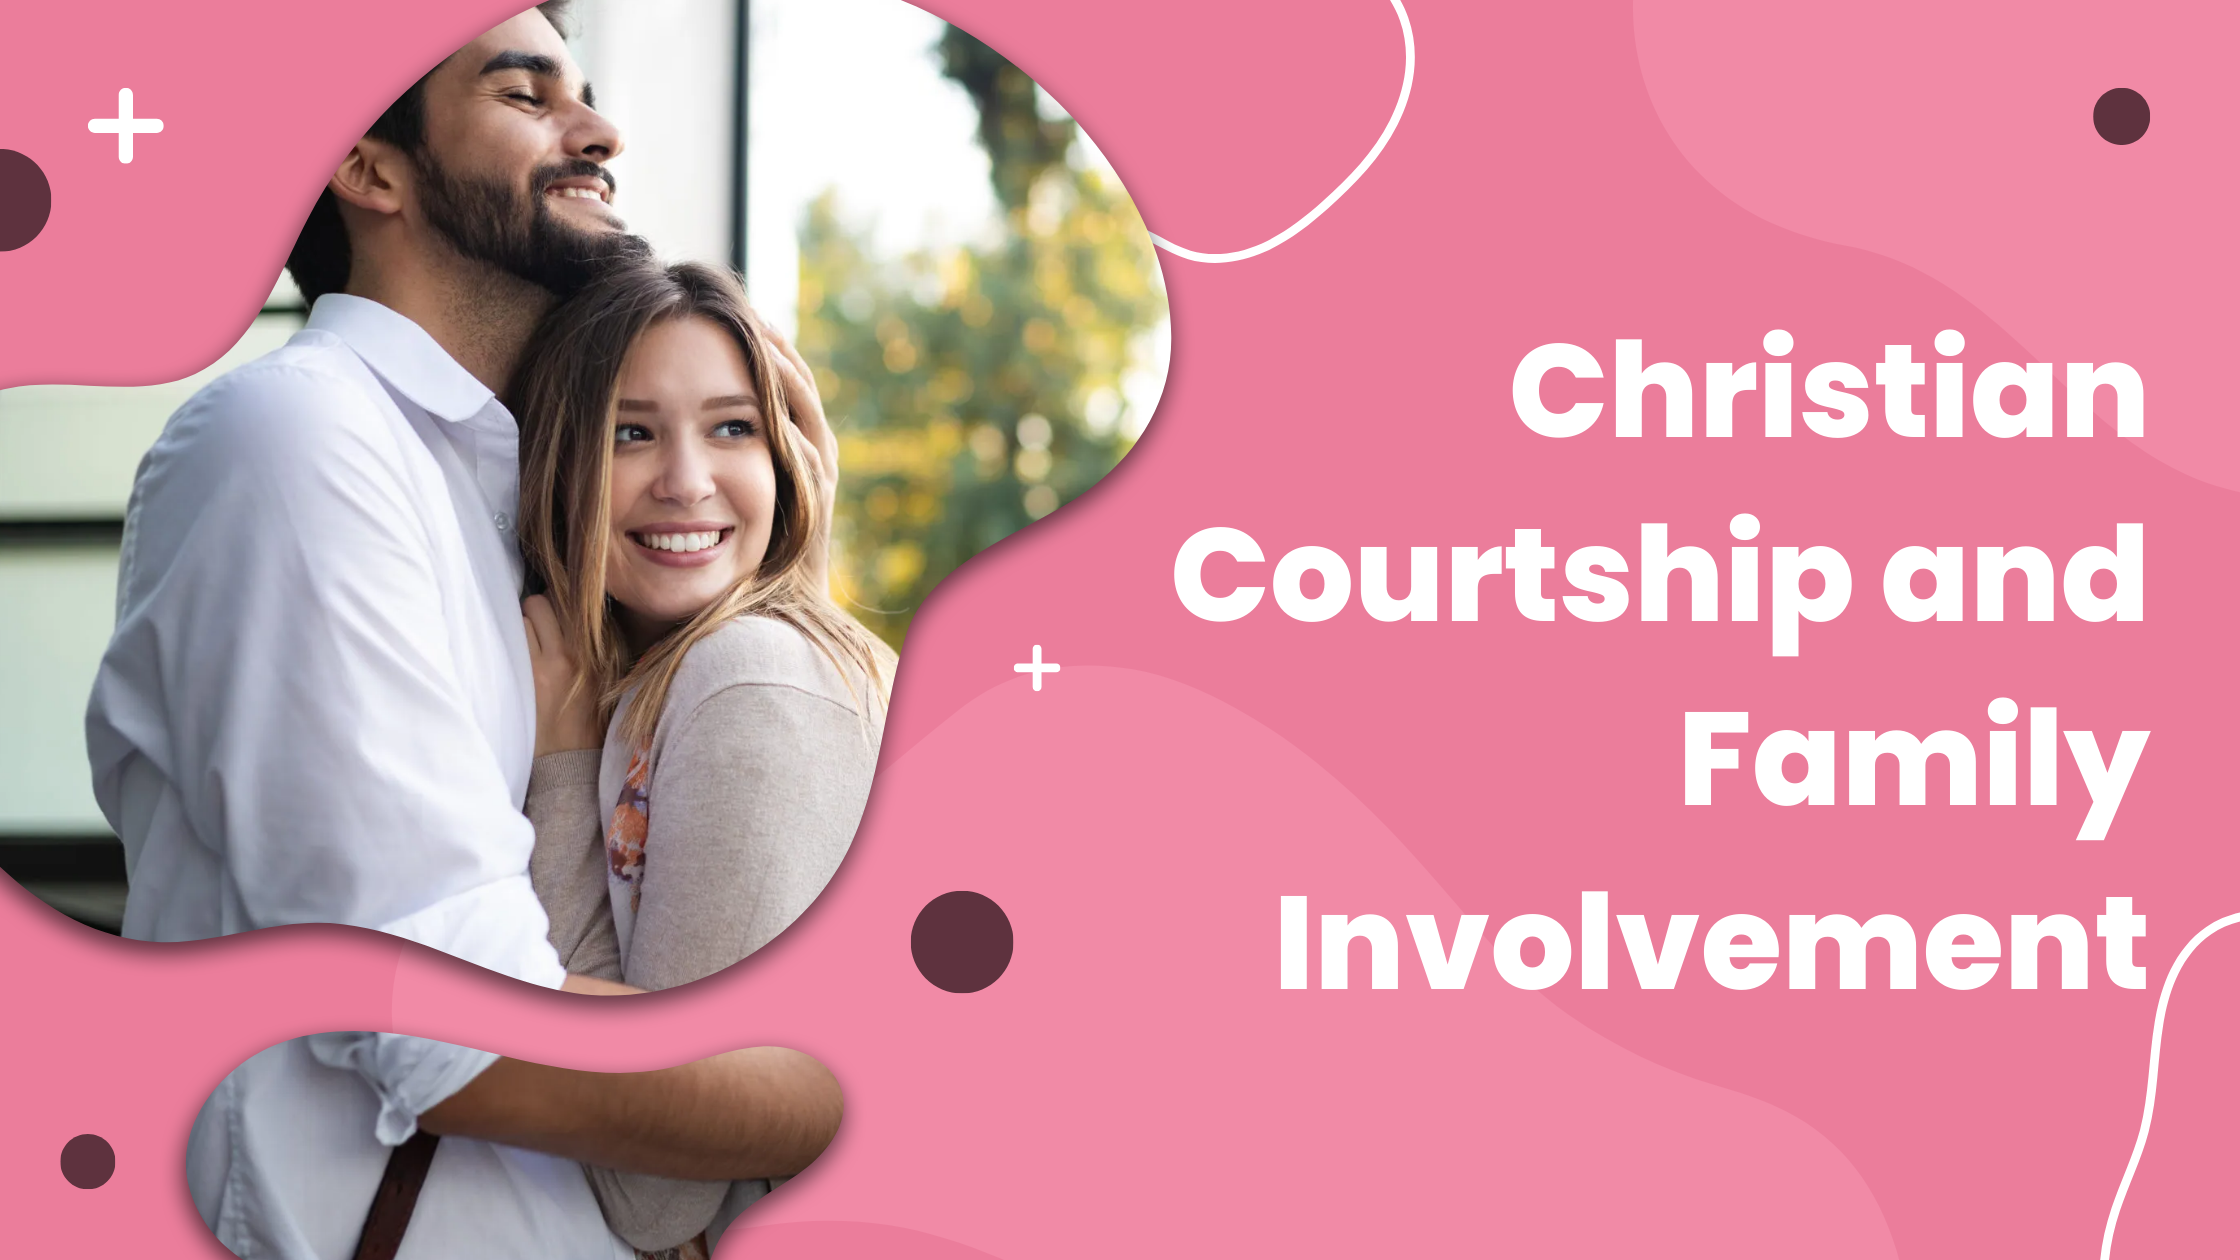 Christian Courtship and Family Involvement